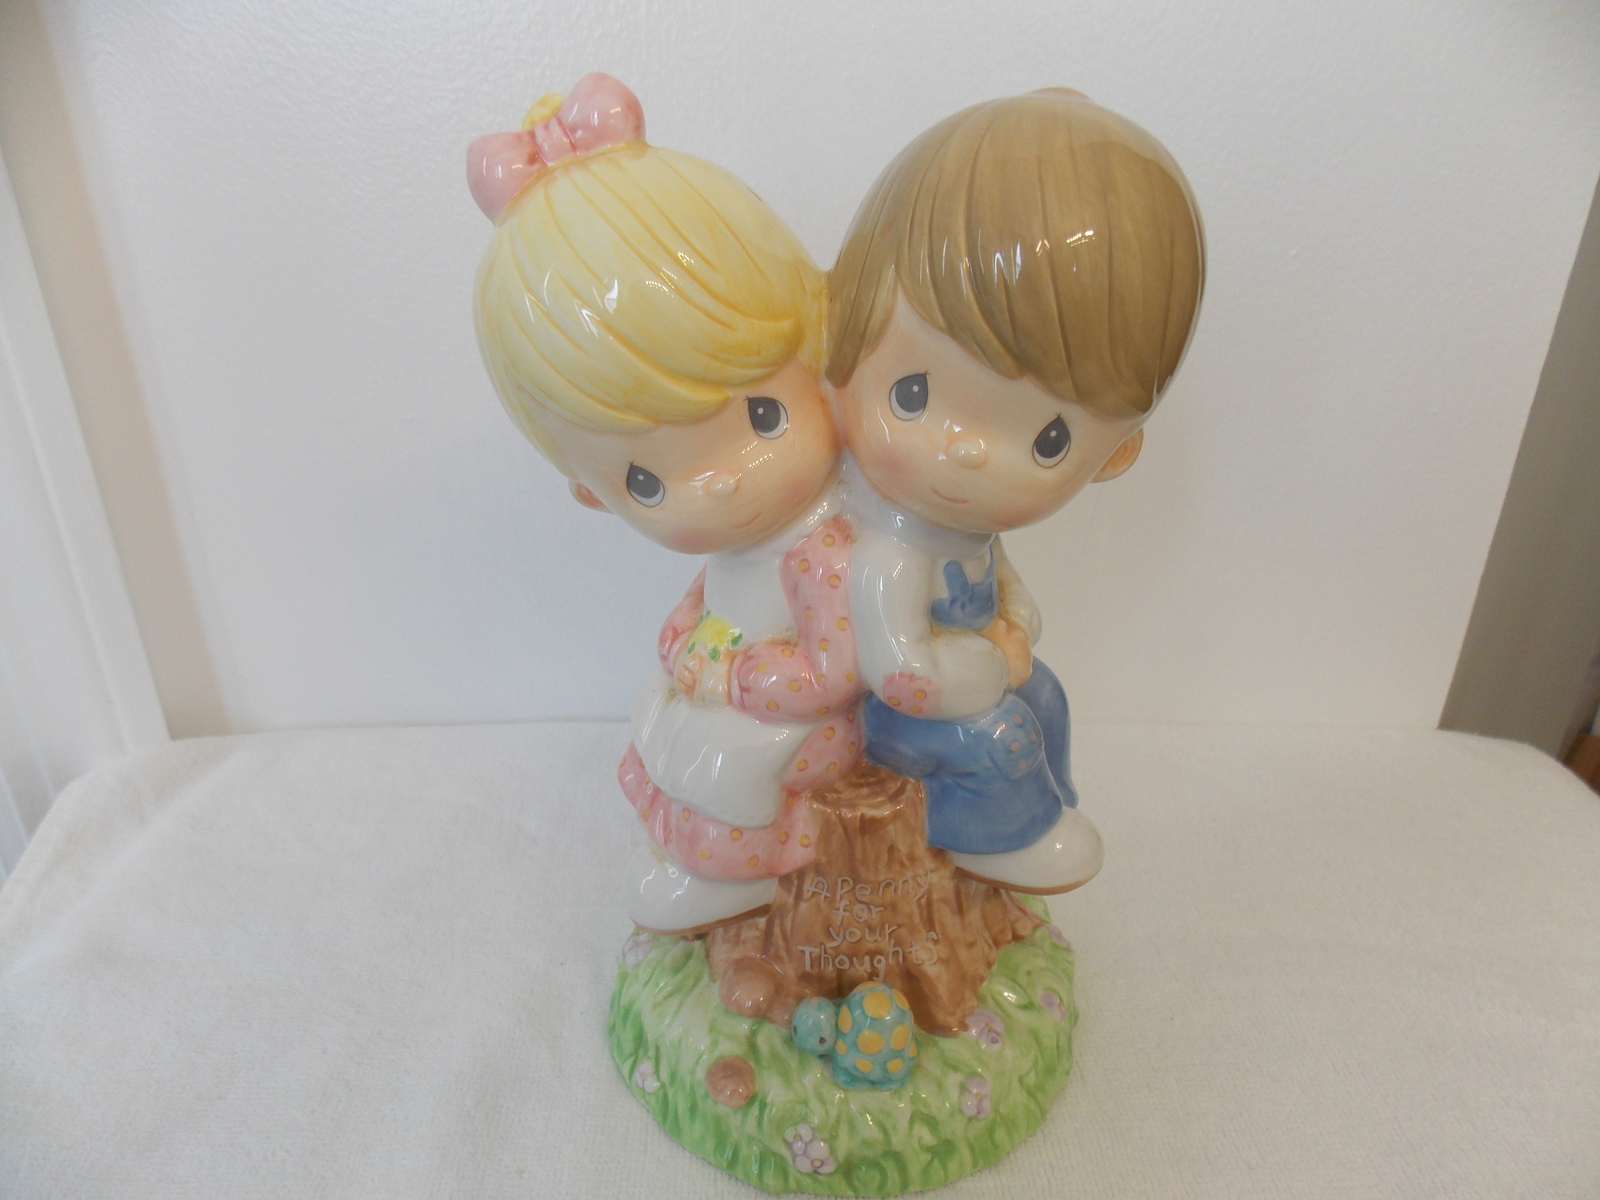 2002 Precious Moments Love One Another Ceramic Piggy Bank  - $30.00